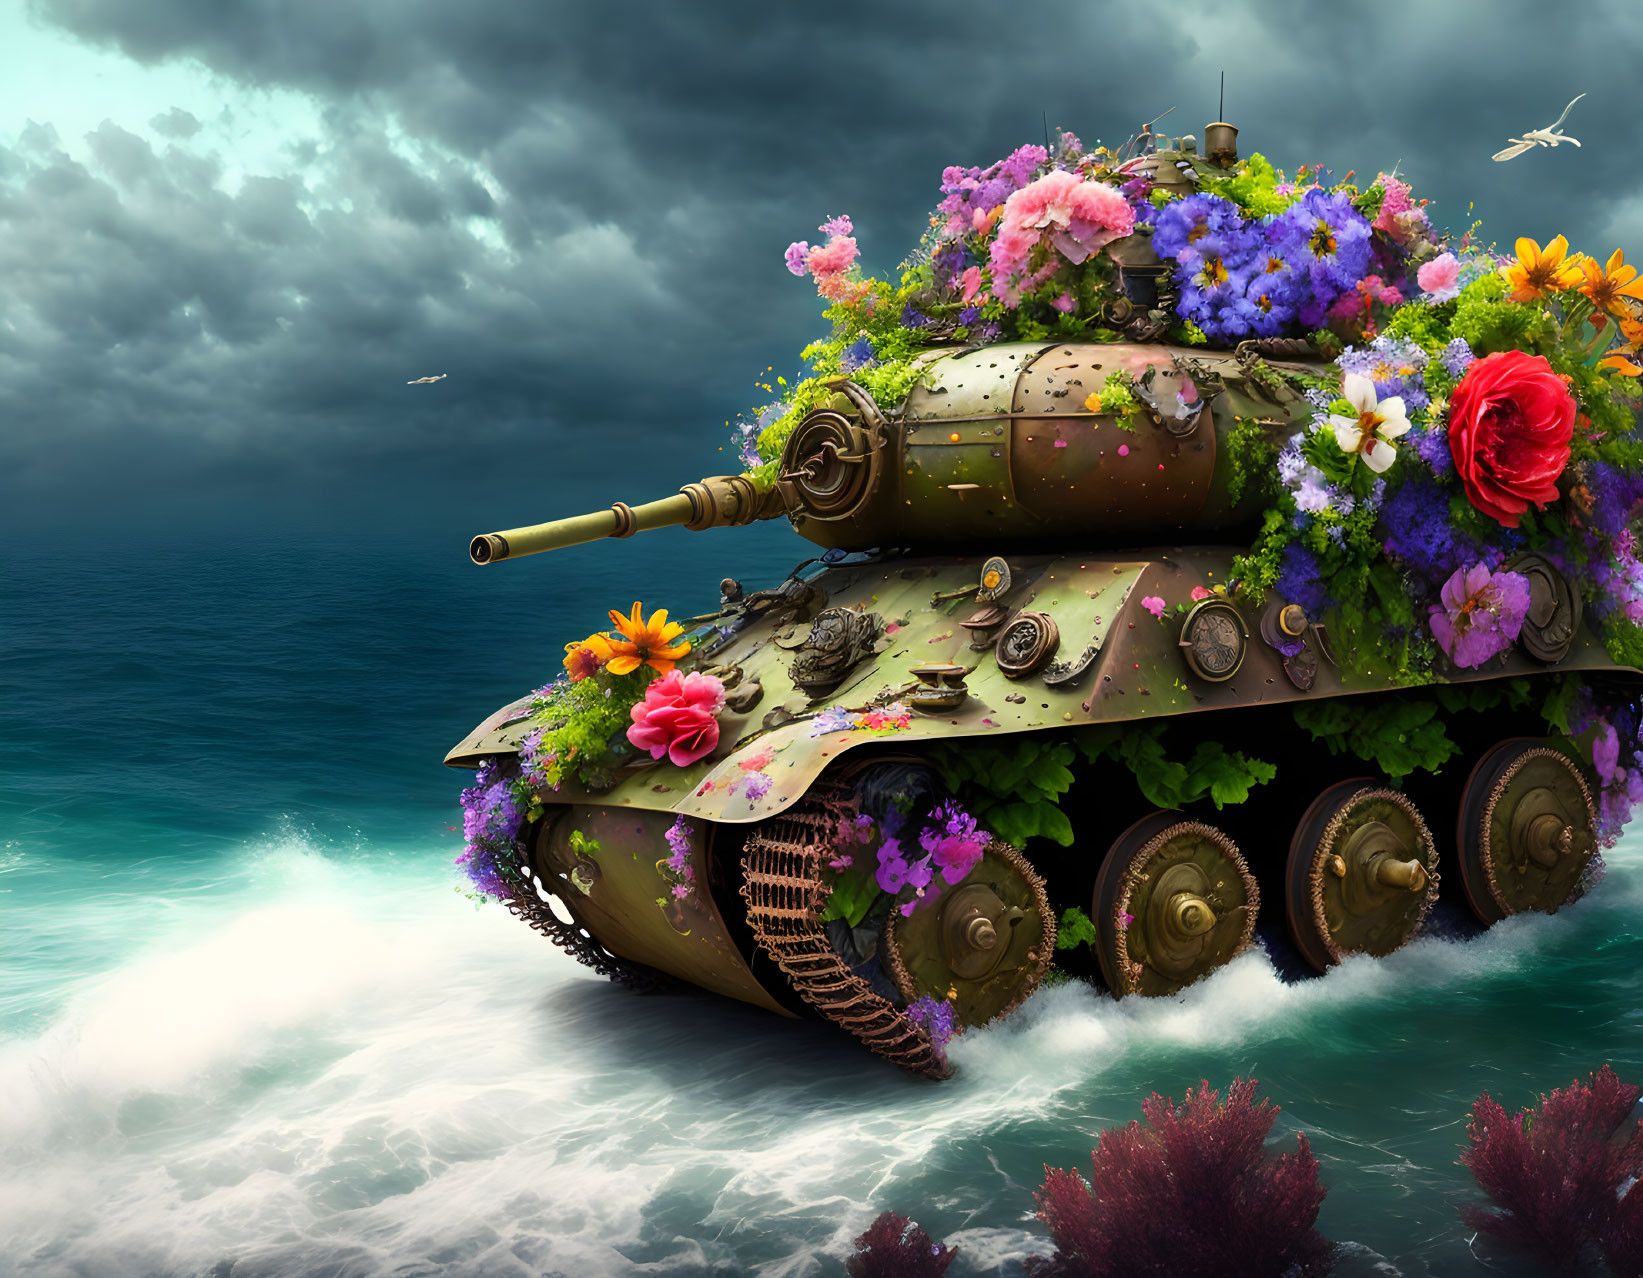 Tank covered in vibrant flowers moving under stormy sky